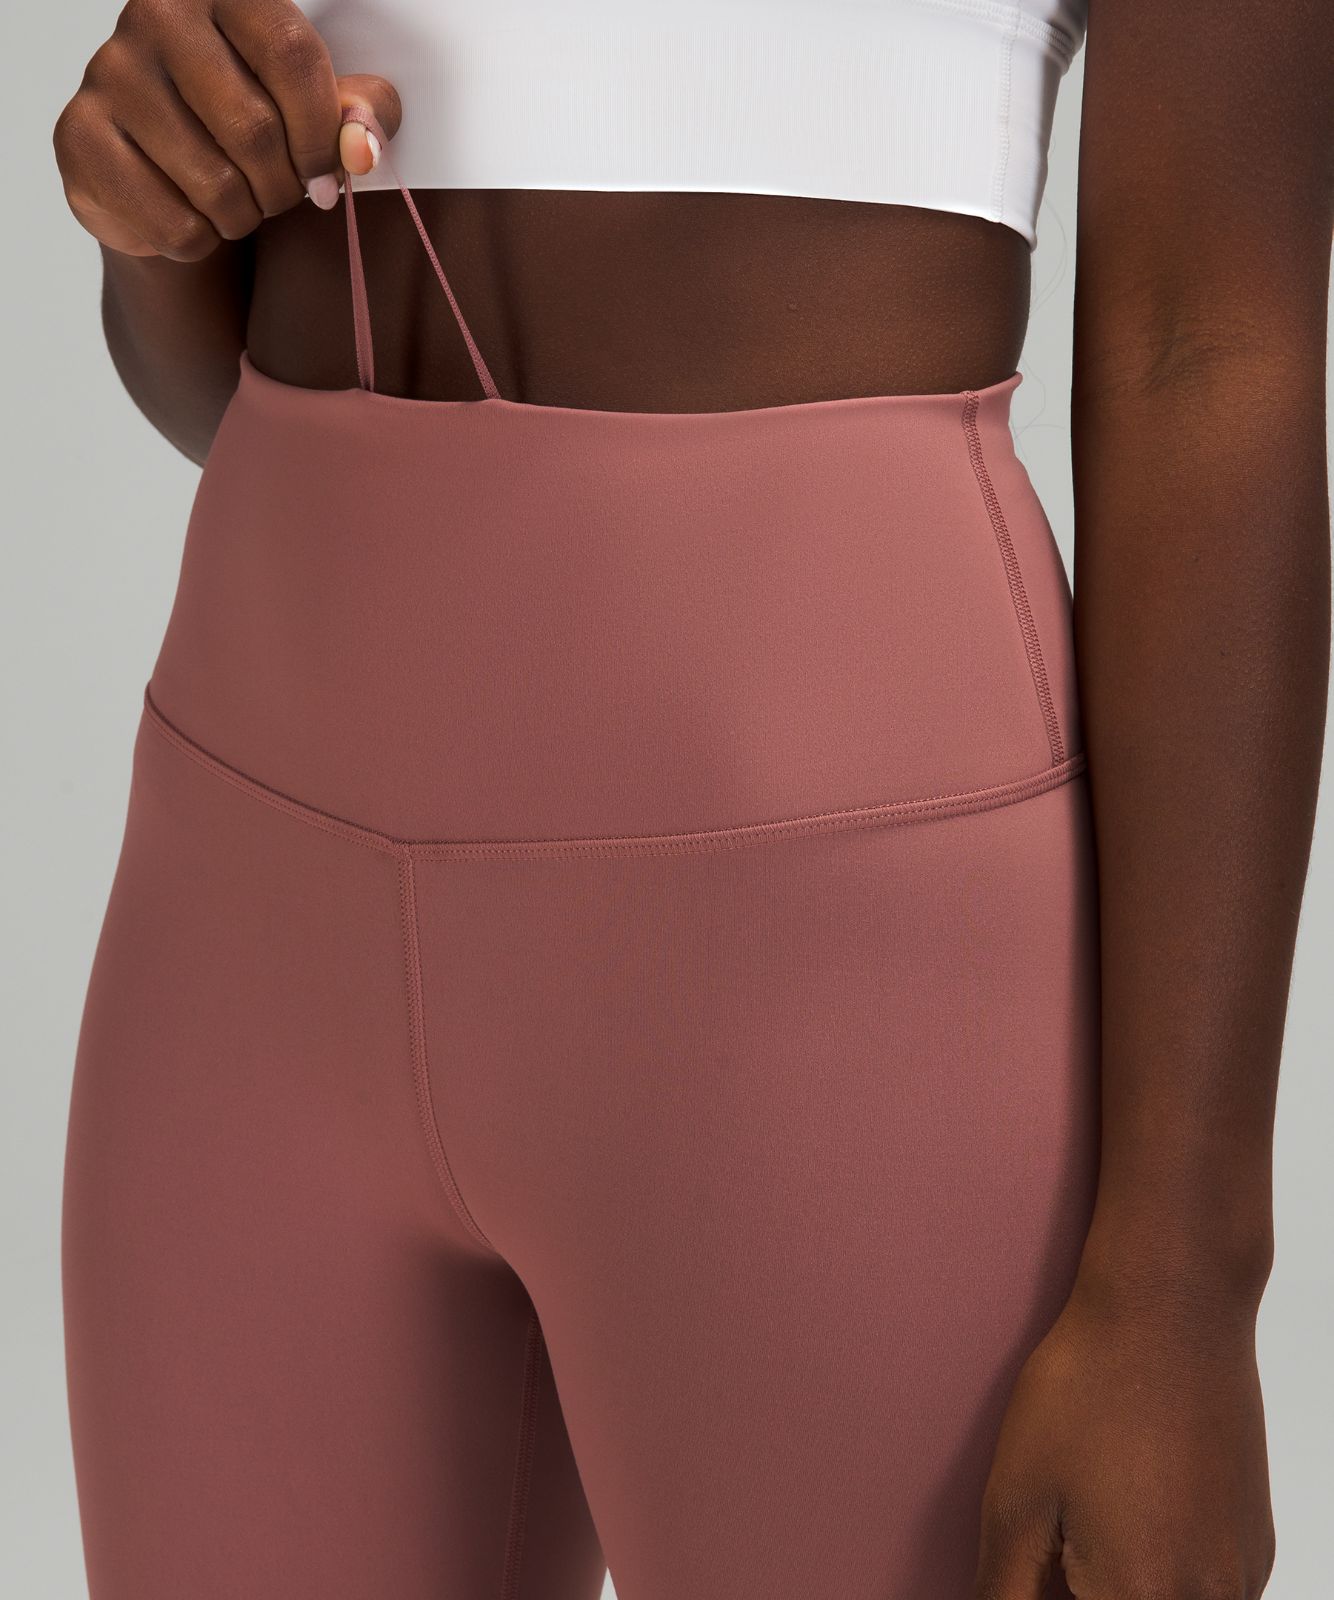 Lululemon Align High Rise Pant with Pockets 25 - Spiced Chai